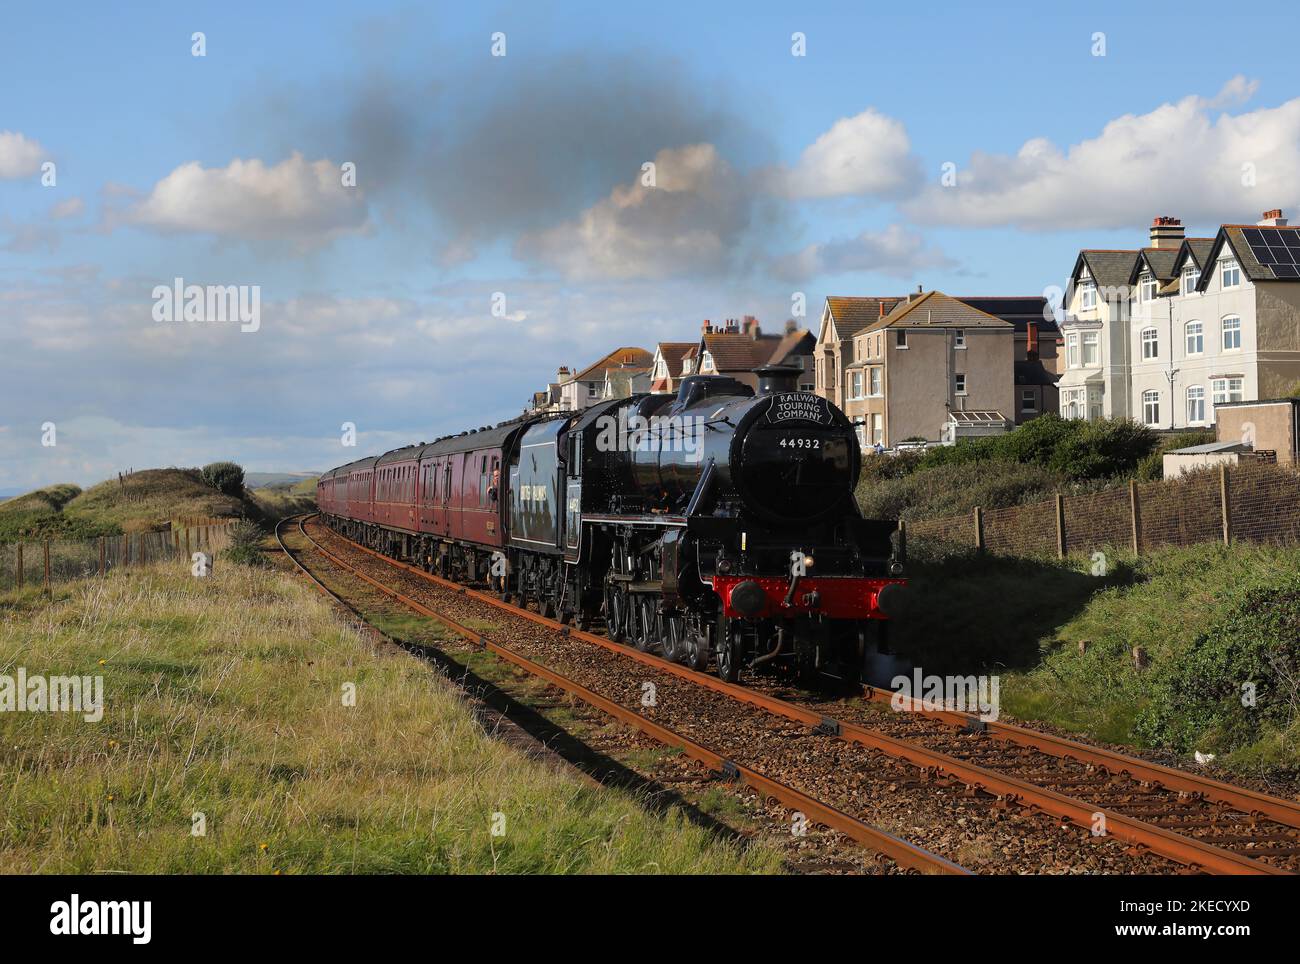 After a water stop at Sellafield 44932 passes Seascale and heads for Carnforth on 24.9.22. Stock Photo